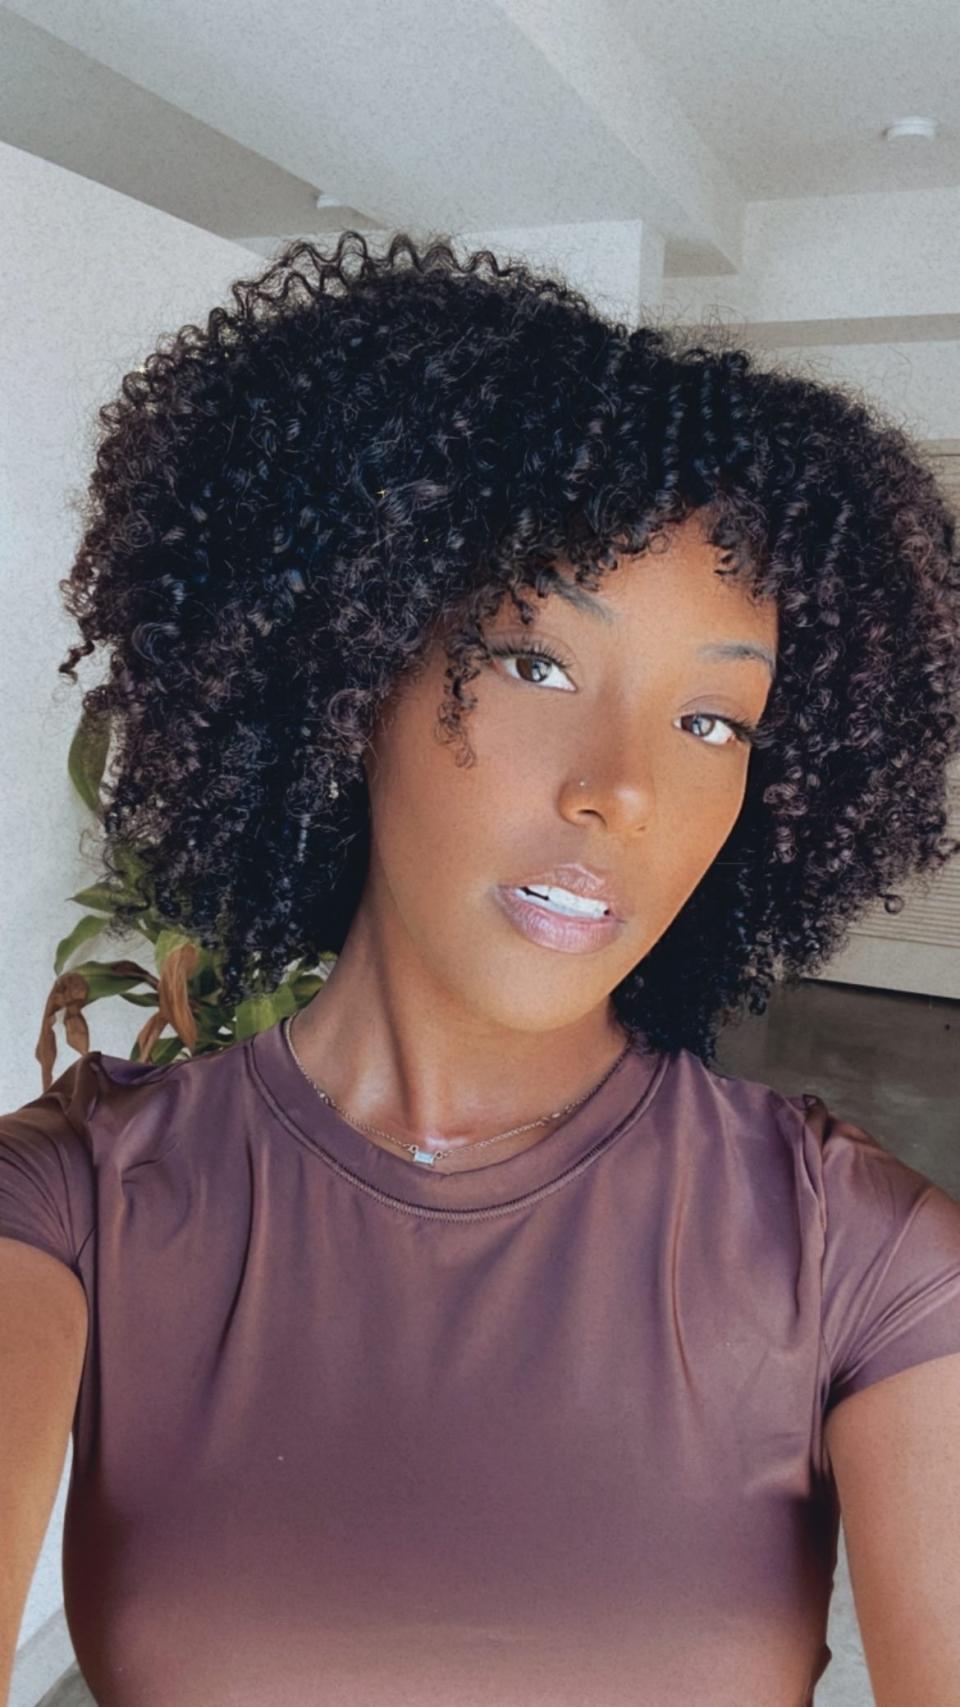 Alexis Davis today is a content creator who has fully embraced her natural curls.